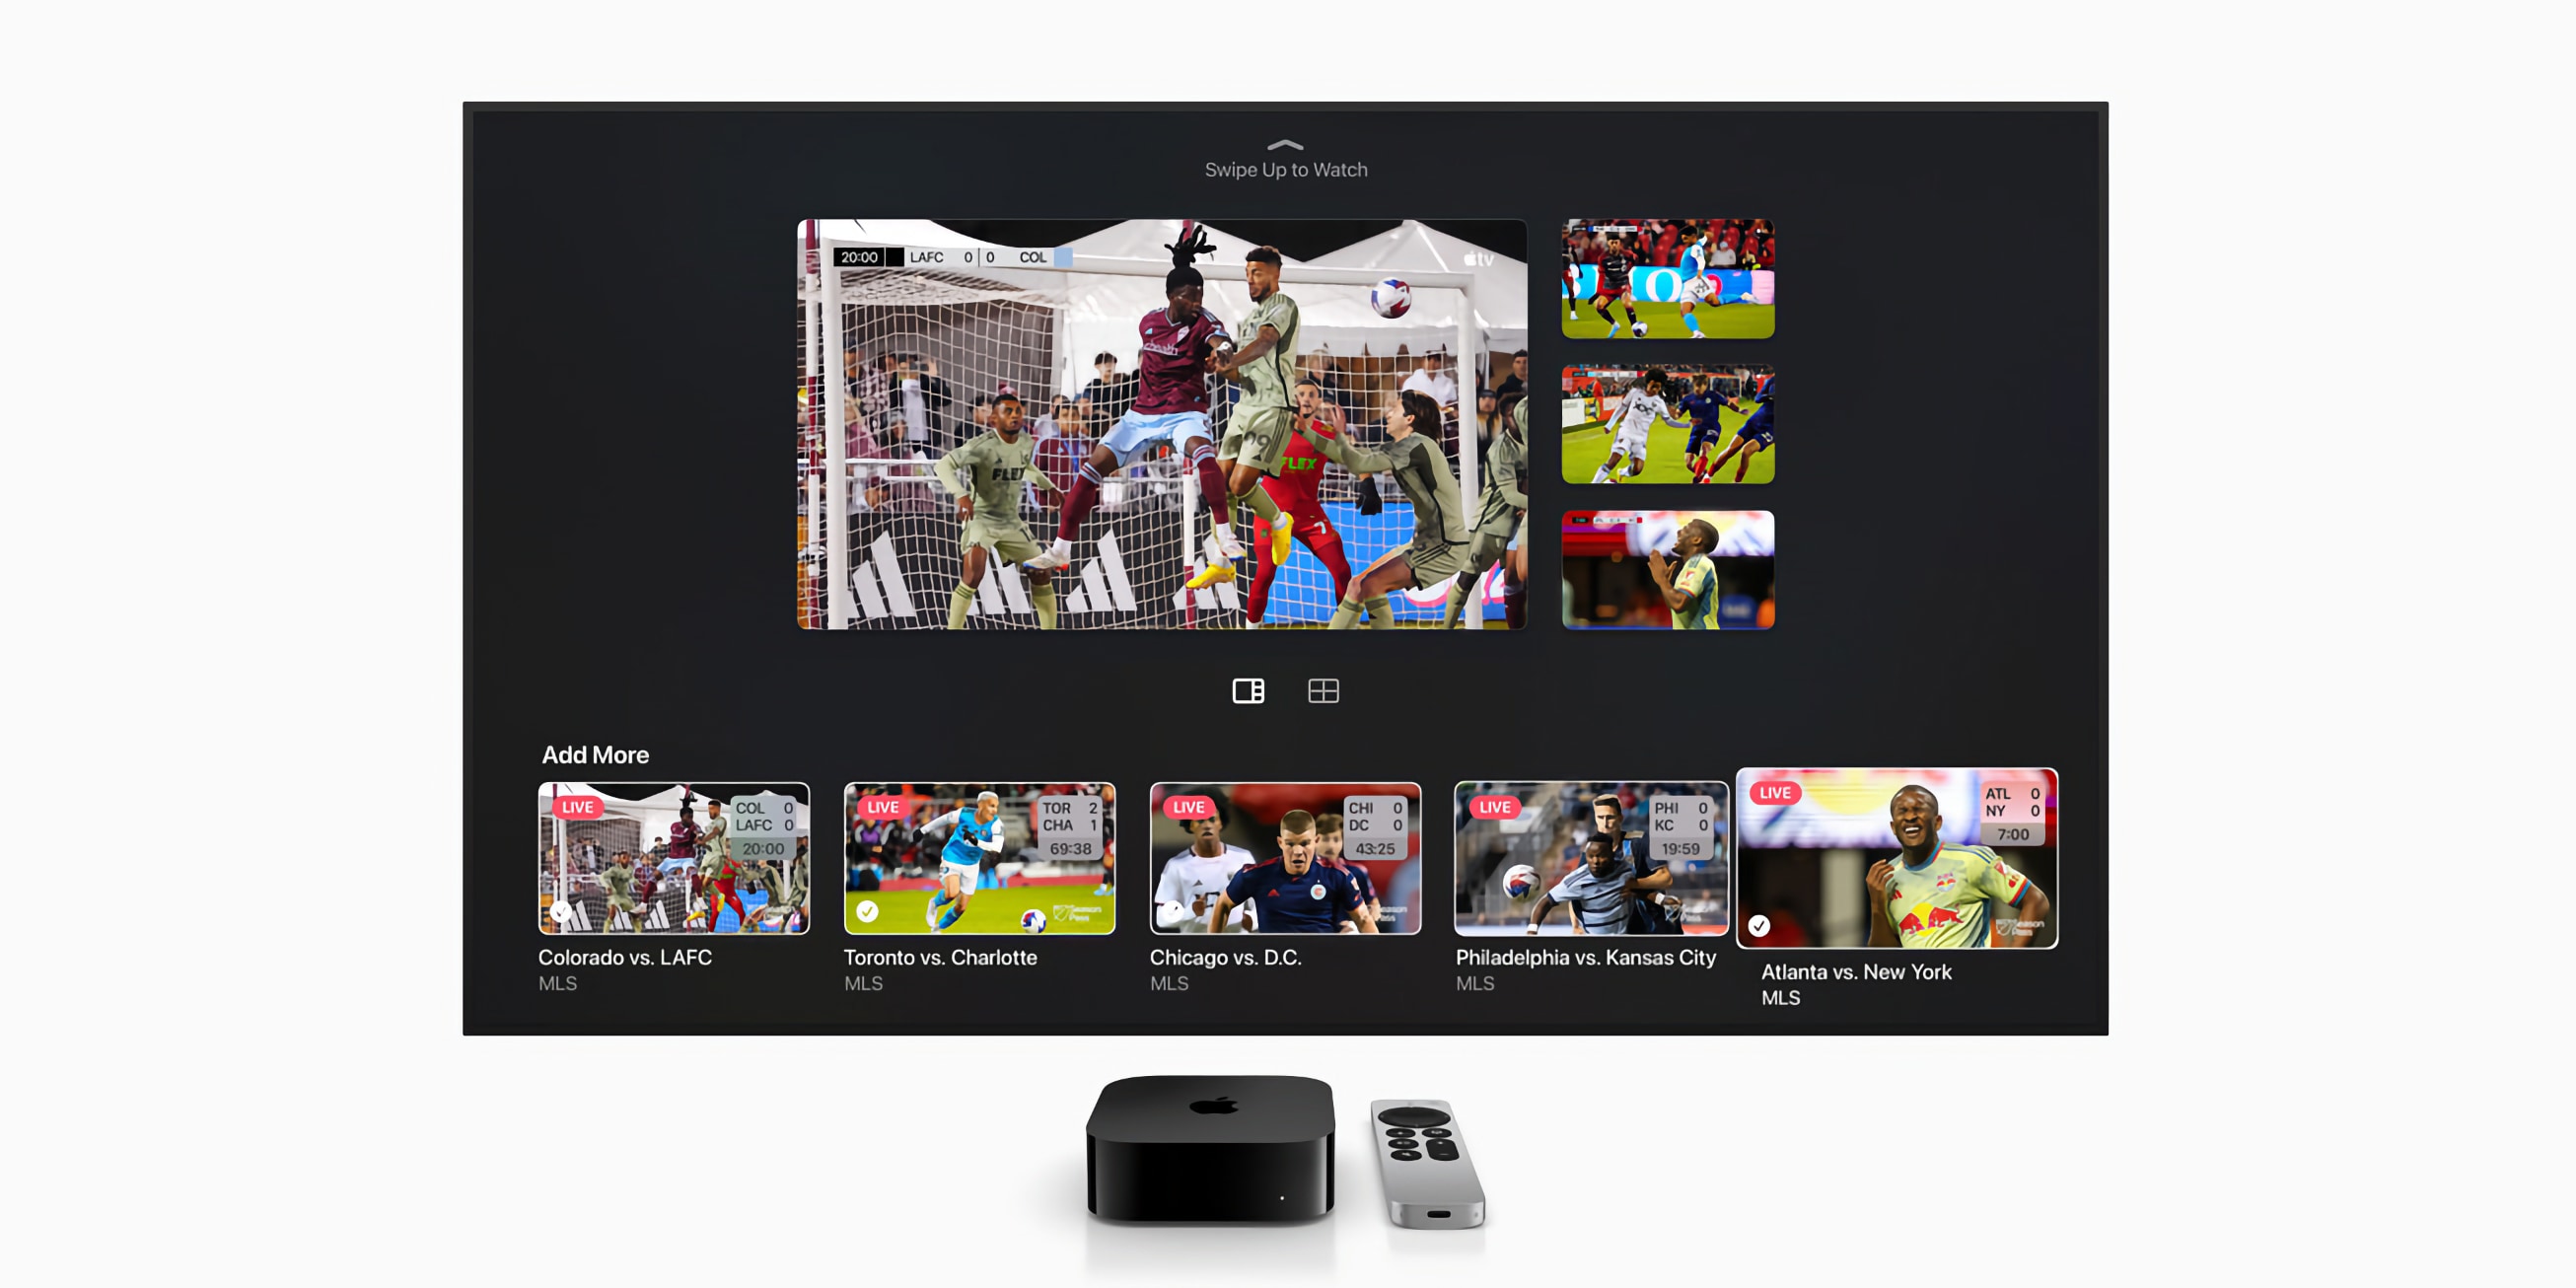 Apple TV officially launches Multiview feature for live sports in TV app